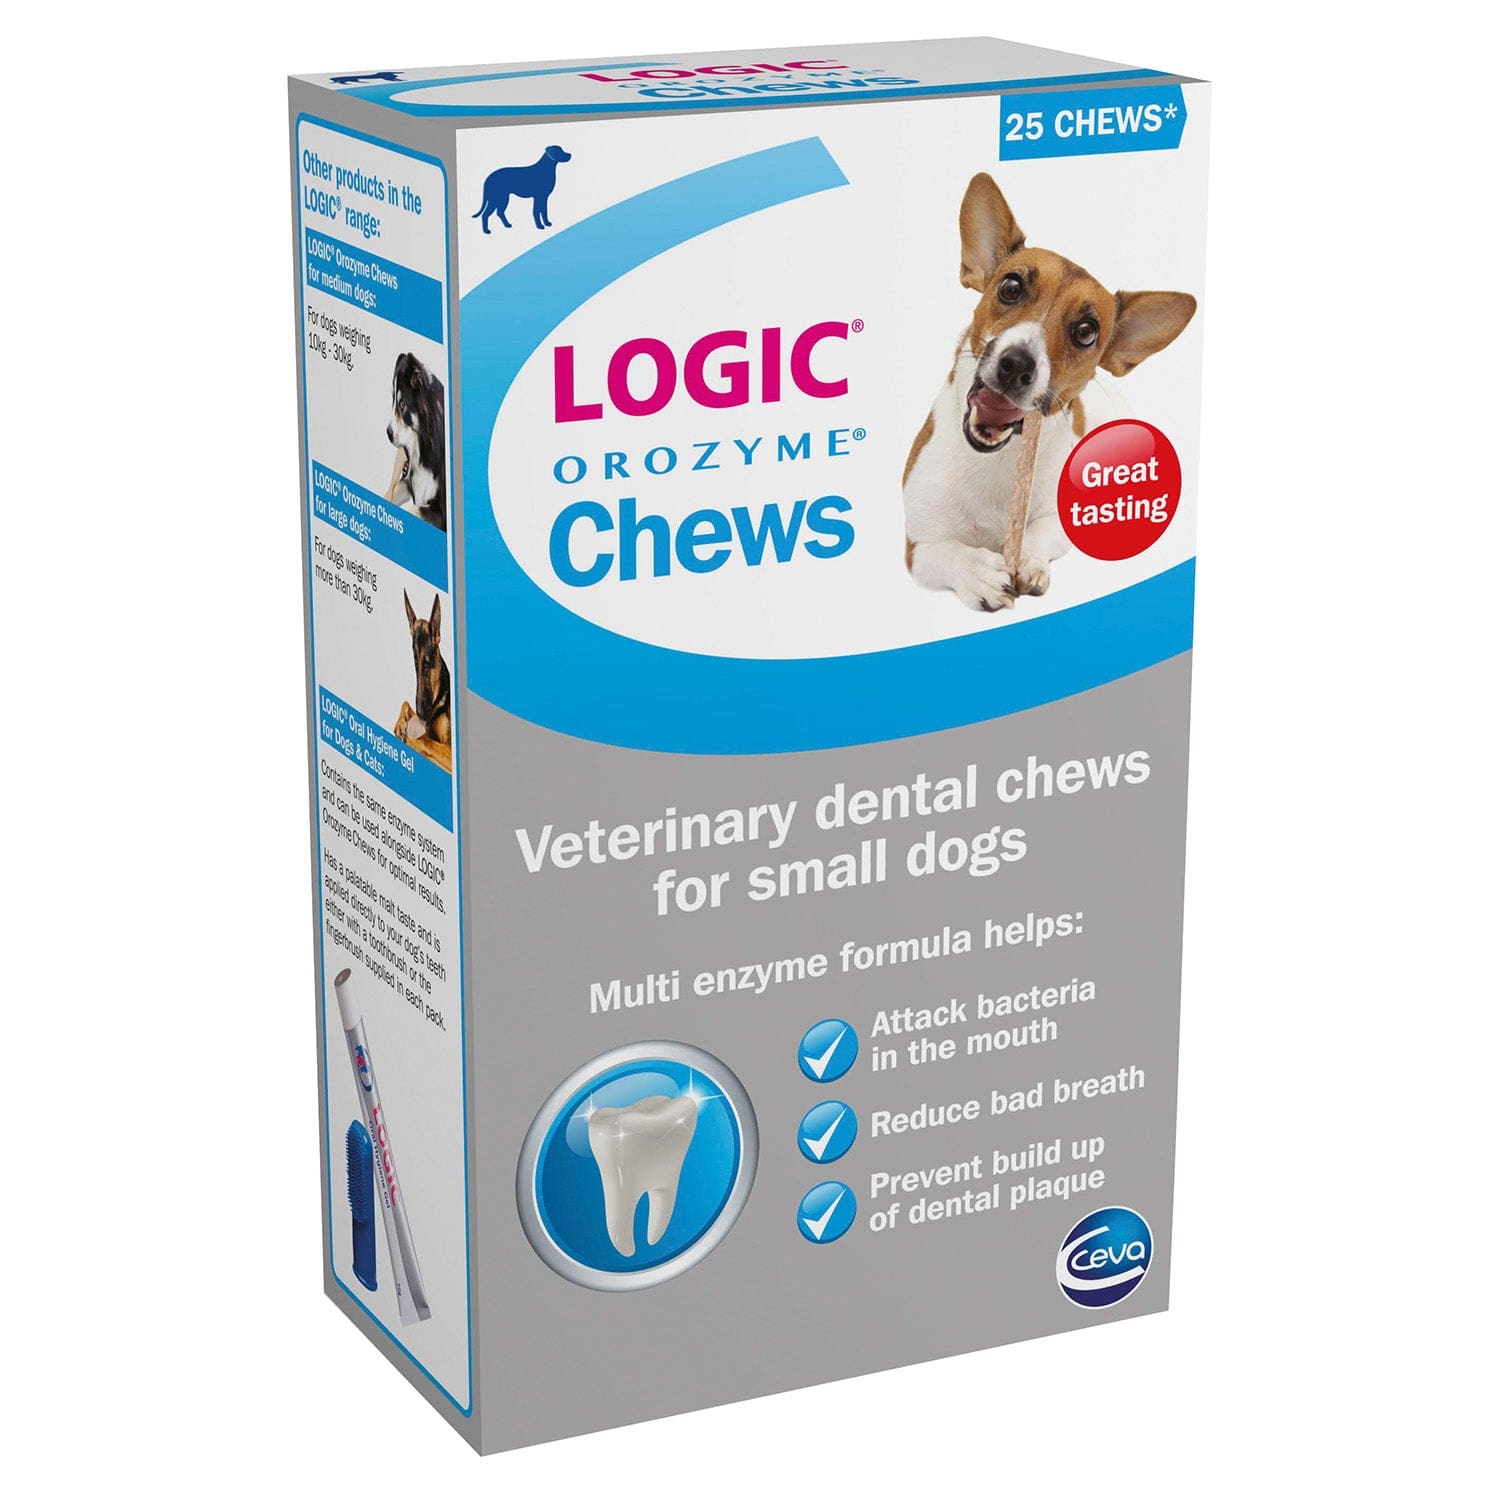 Logic orozyme chews for small dogs